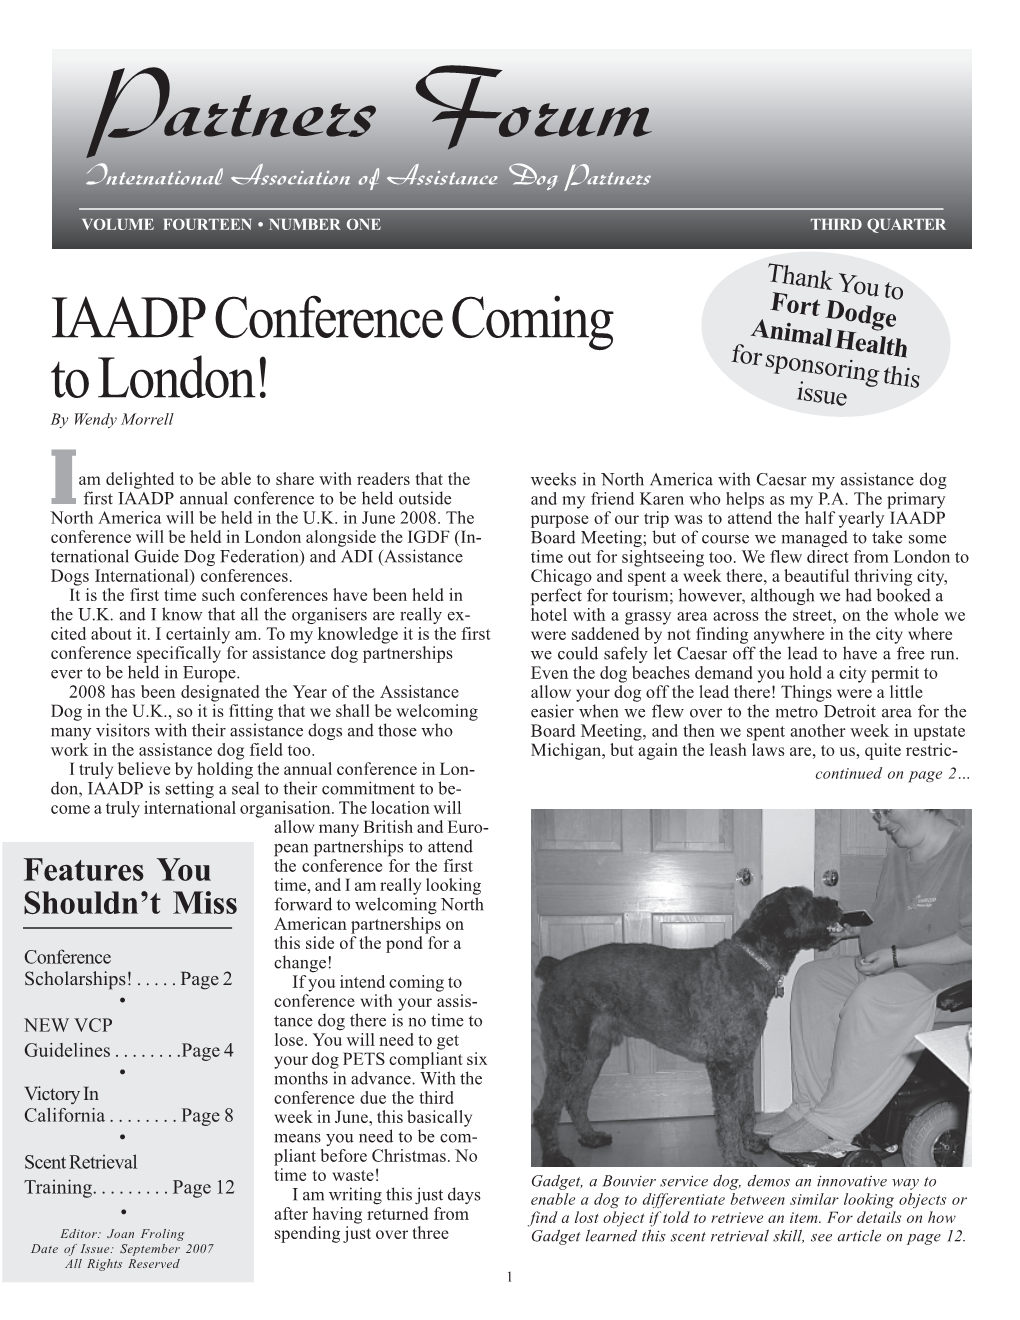 IAADP Conference Coming to London!